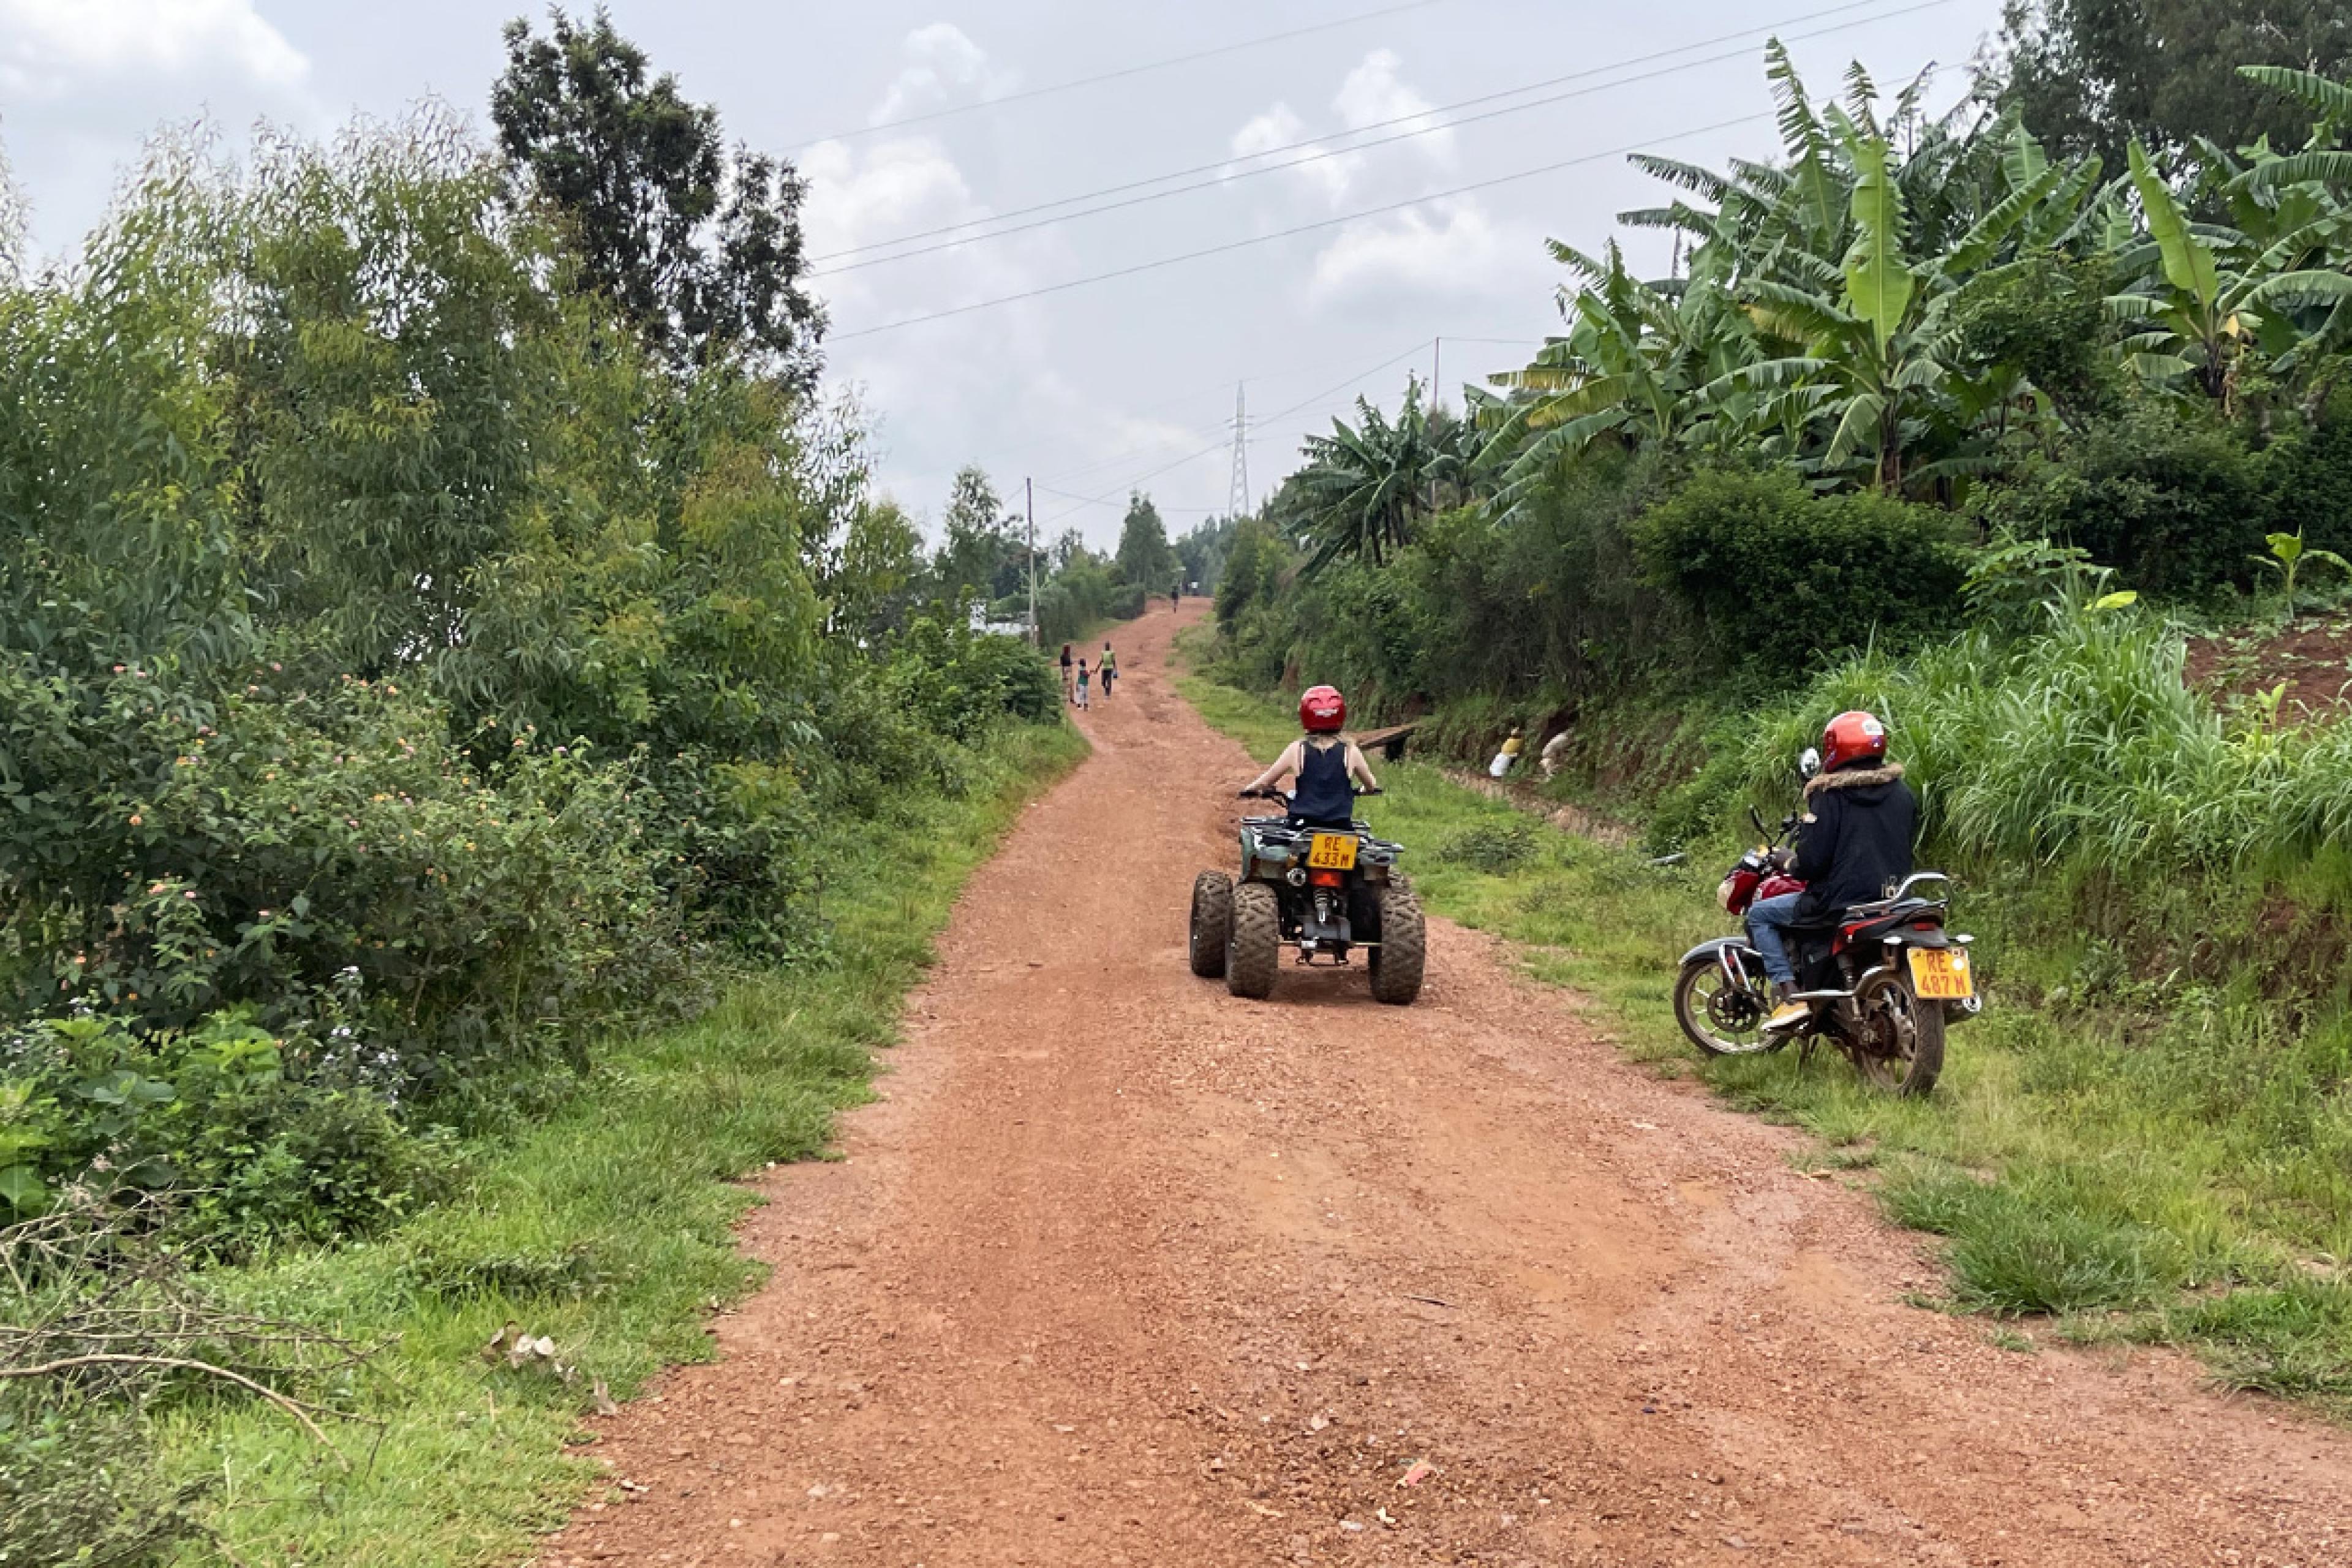 quad biking down a dirt path lined with greenery